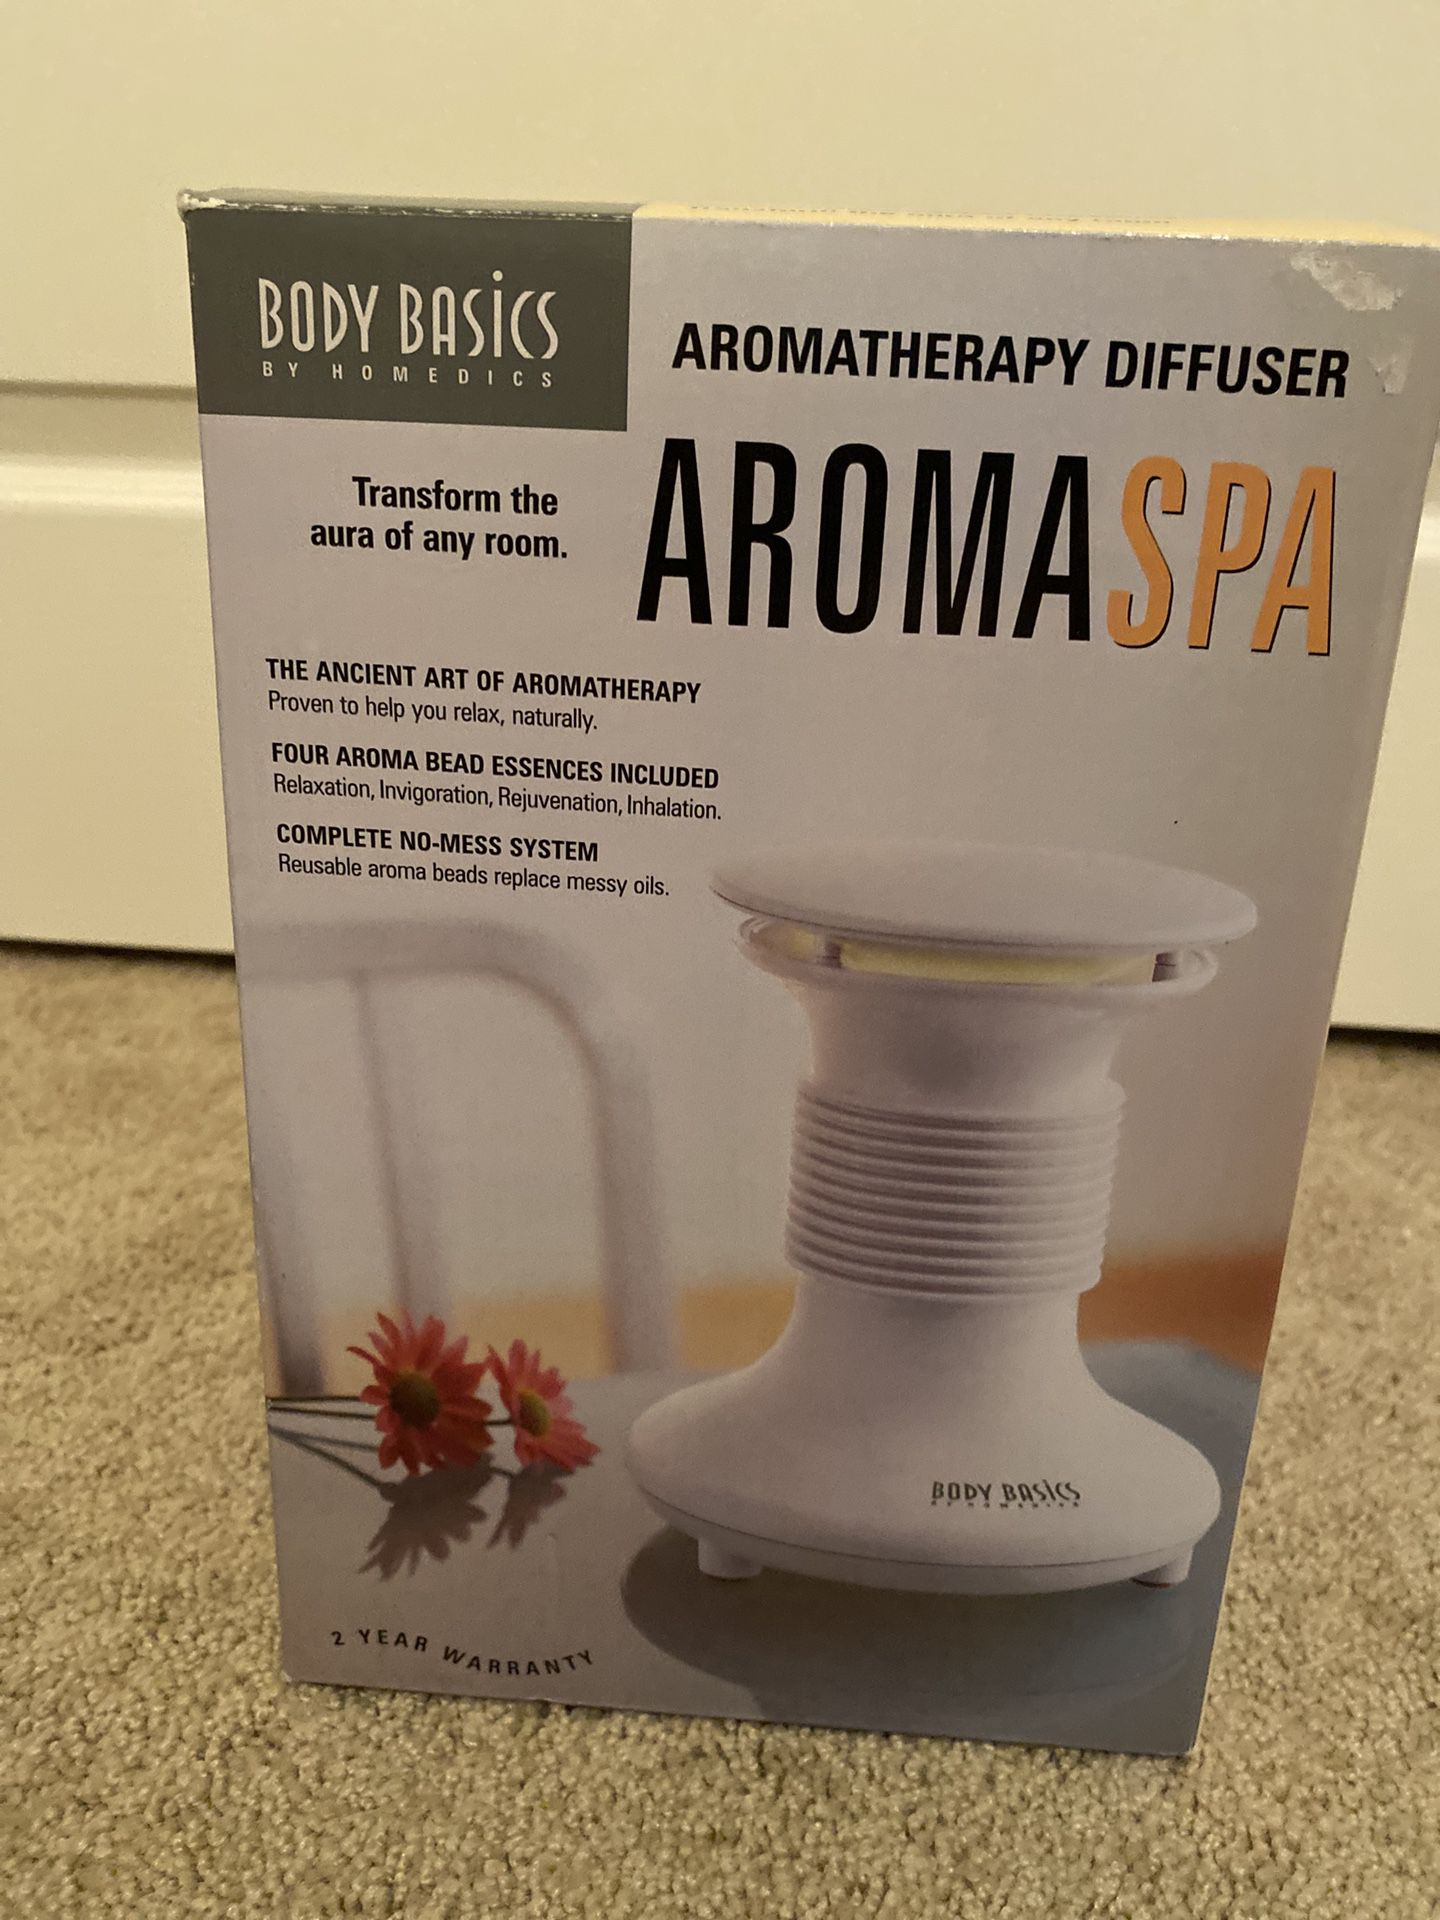 New Homedics Body Basics Aroma Spa Aromatherapy Diffuser with 4 Bead Jars for Mother’s Day